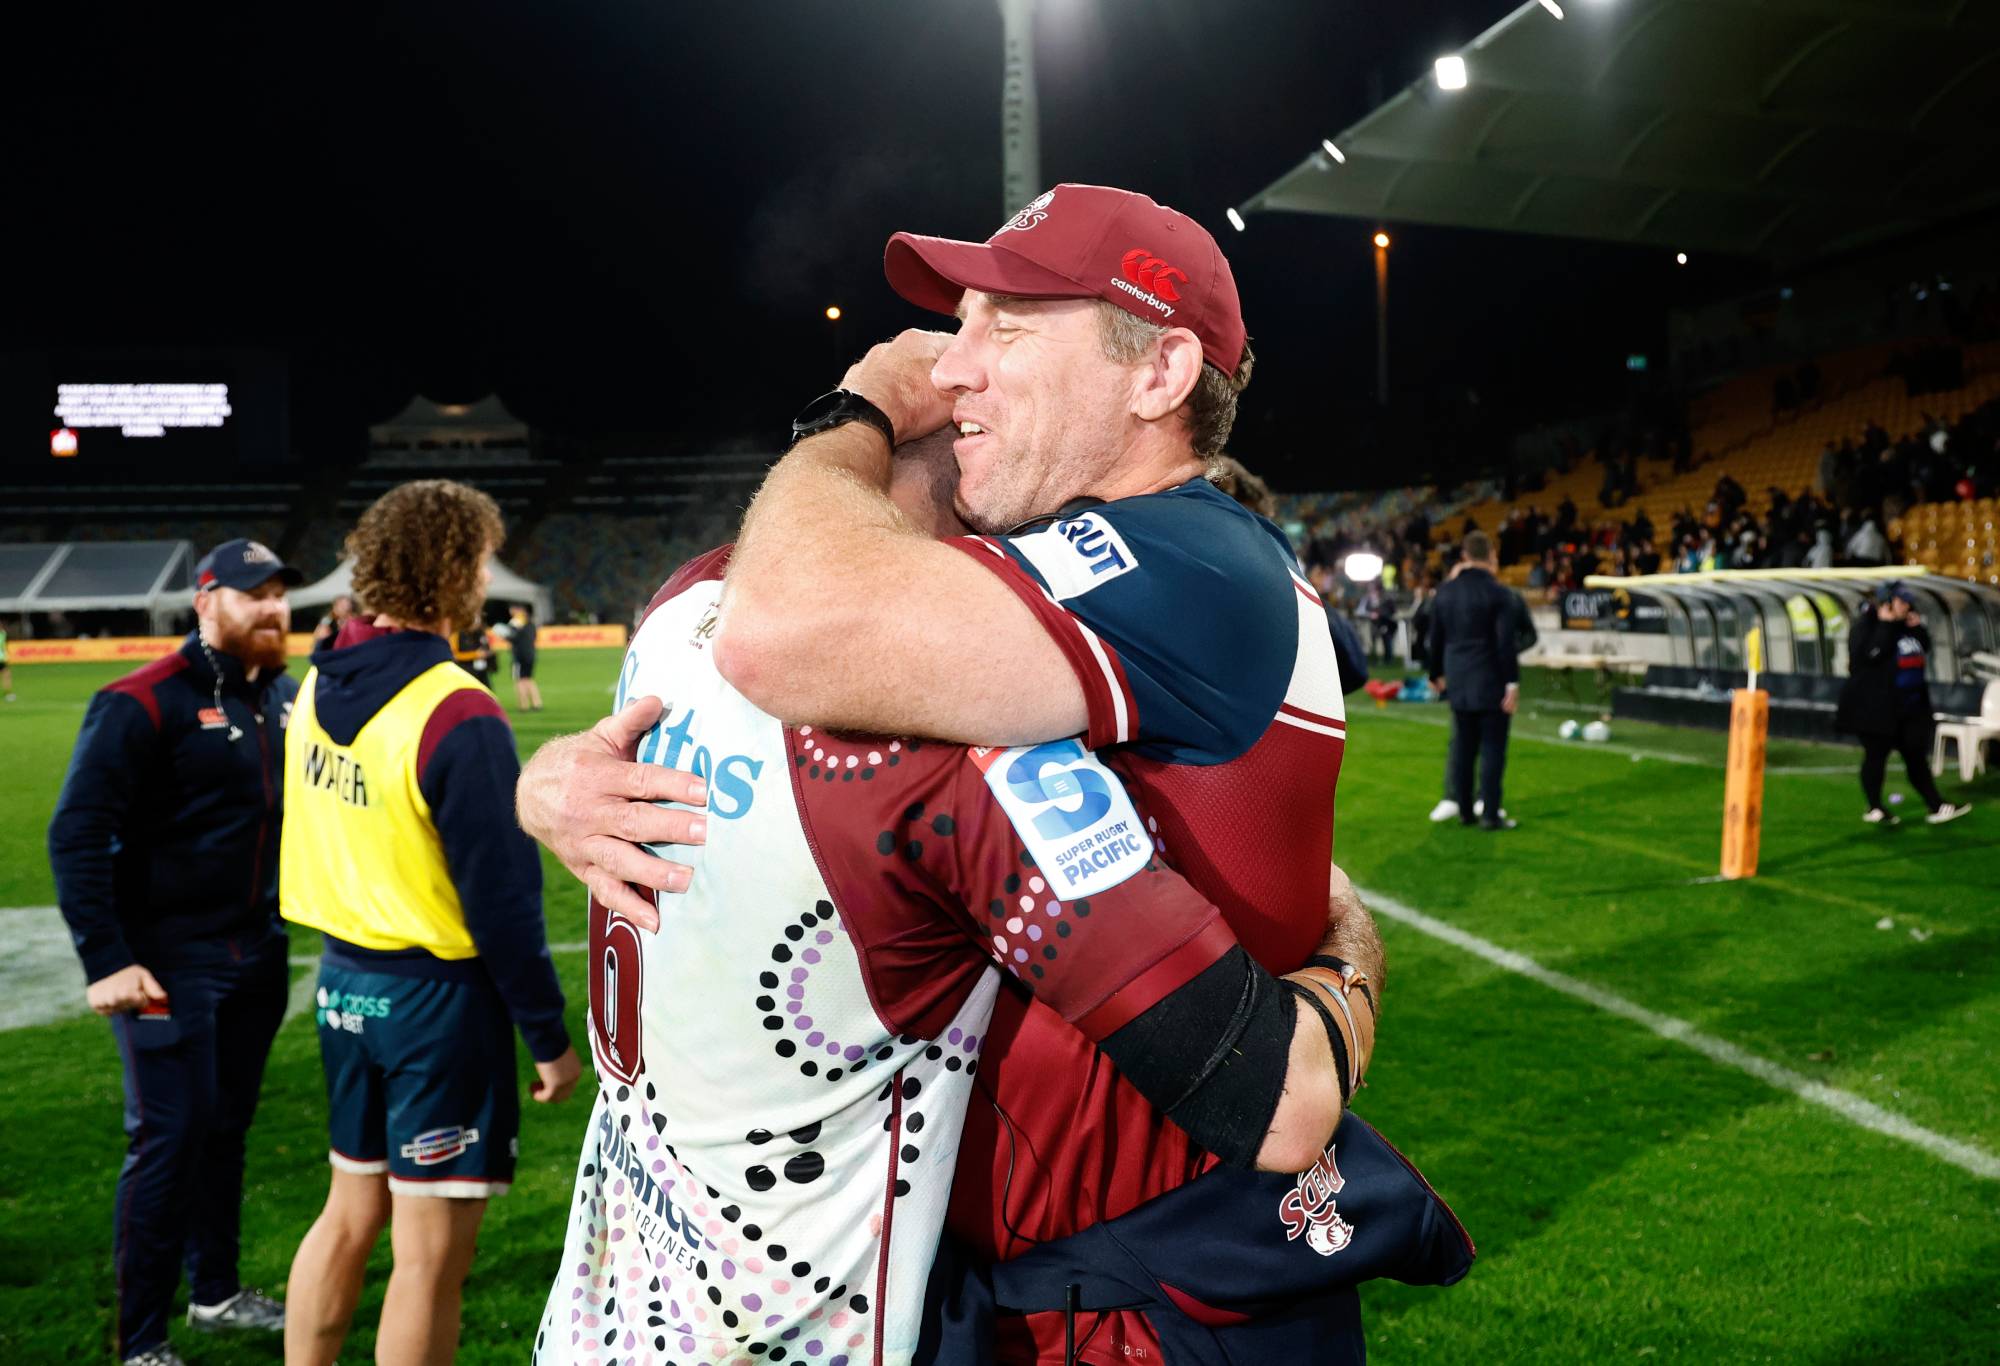 The Reds' Liam Wright celebrates with head coach Brad Thorn during the Super Rugby Pacific Round 12 game between the Chiefs and Queensland Reds at Yarrow Stadium on May 12, 2023 in New Plymouth, New Zealand. (Photo by Andy Jackson/Getty Images)